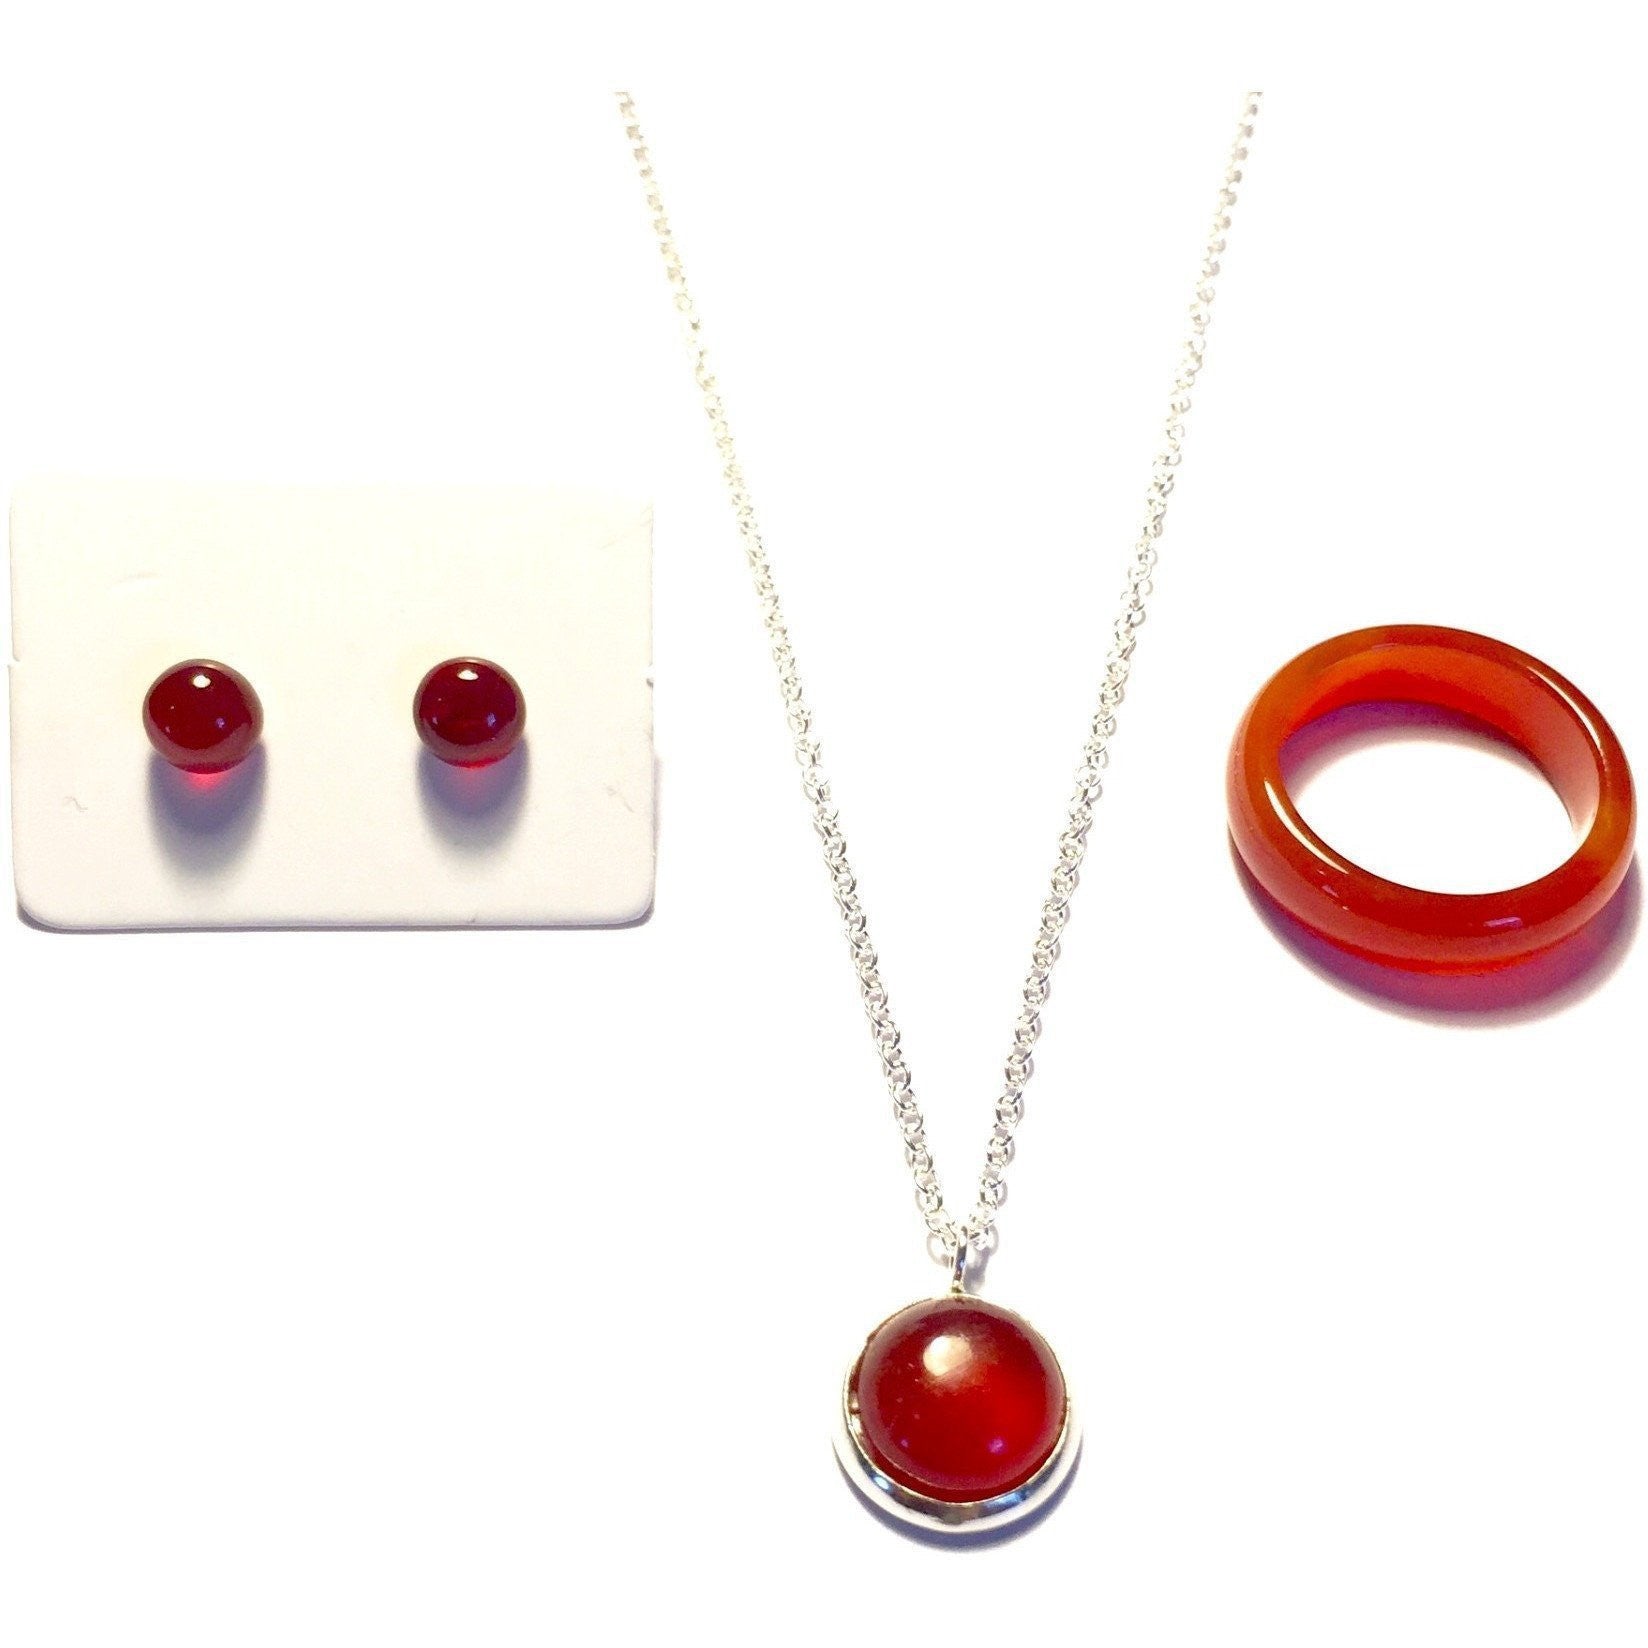 Strawberry Rhubarb Agate Stone Ring, Necklace, and Earring Set-Whitestone Jewelry Co.